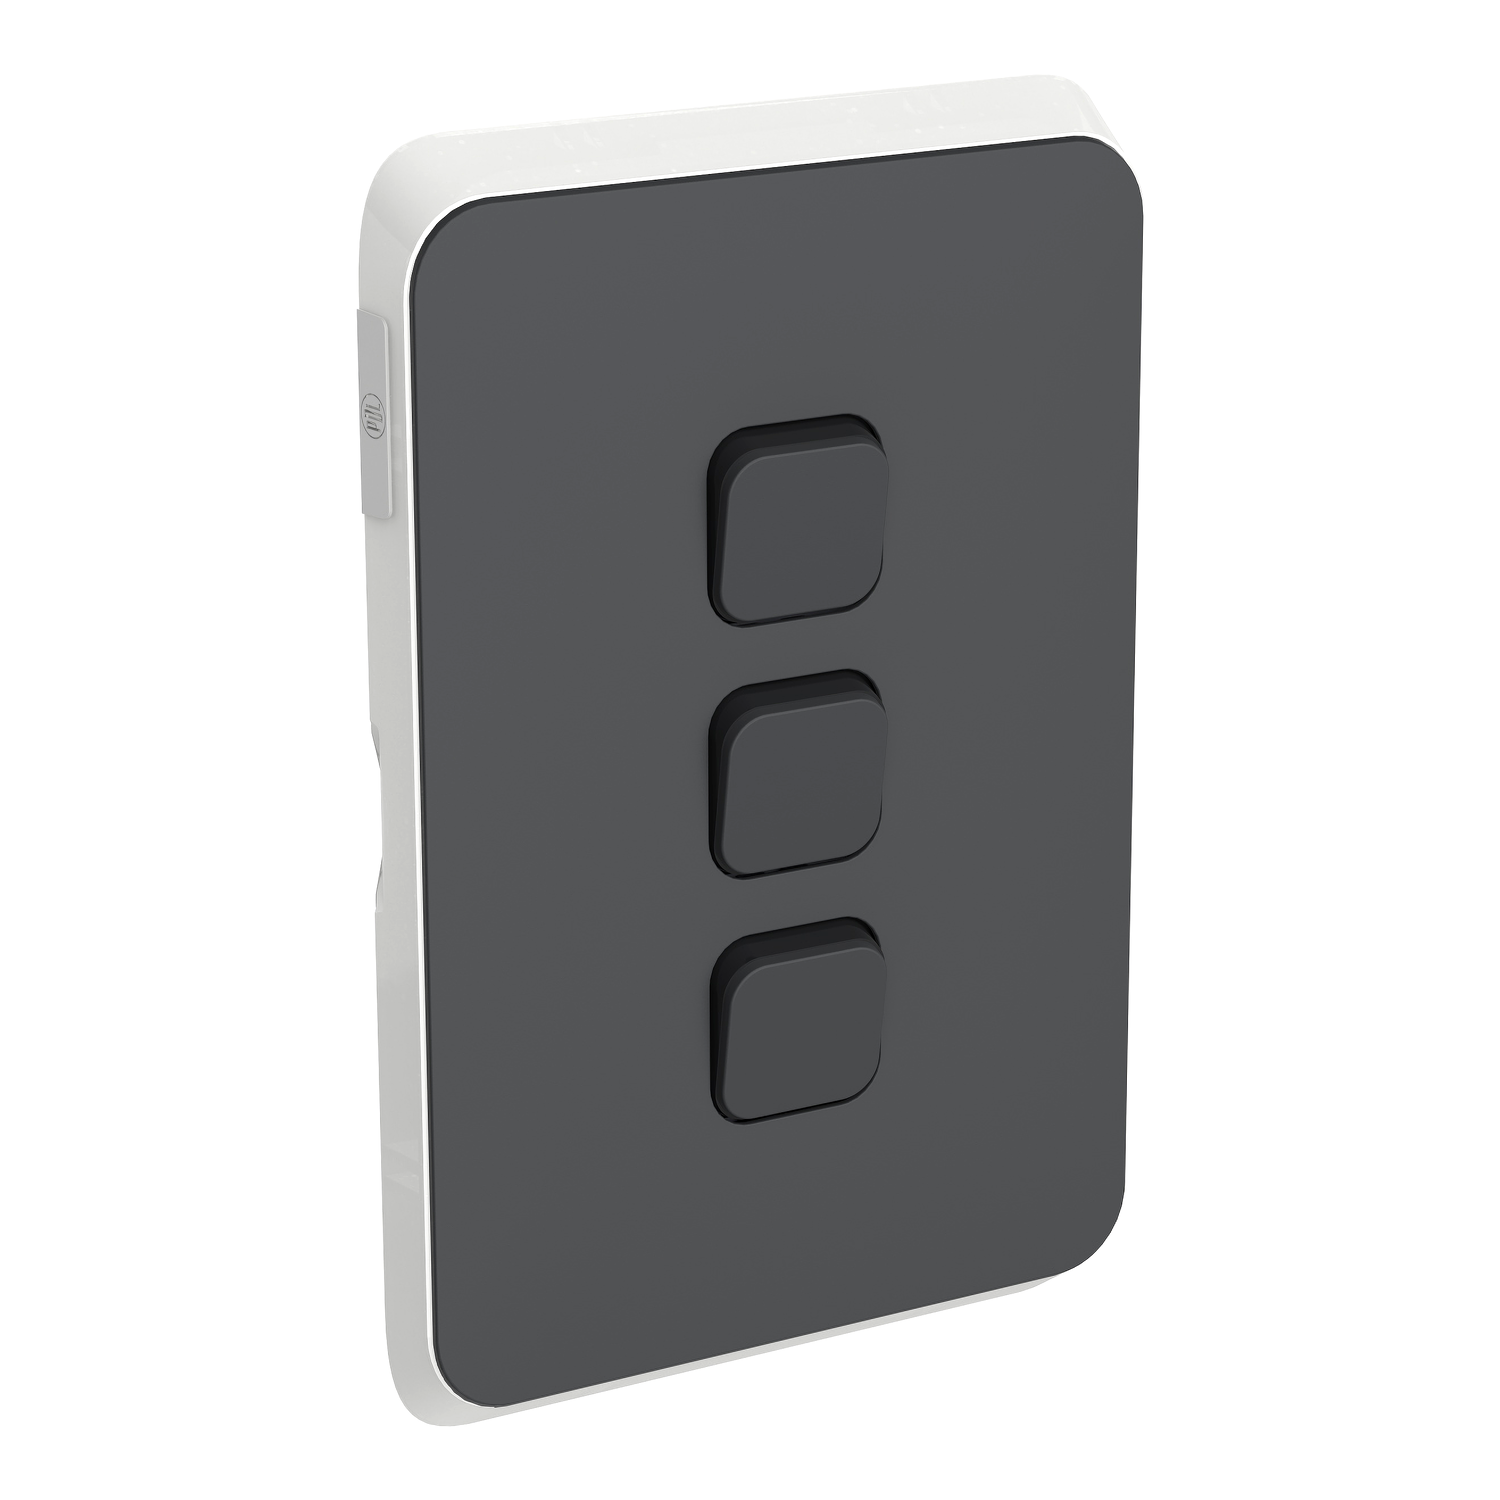 PDL Iconic - Cover Plate Switch 3-Gang - Anthracite